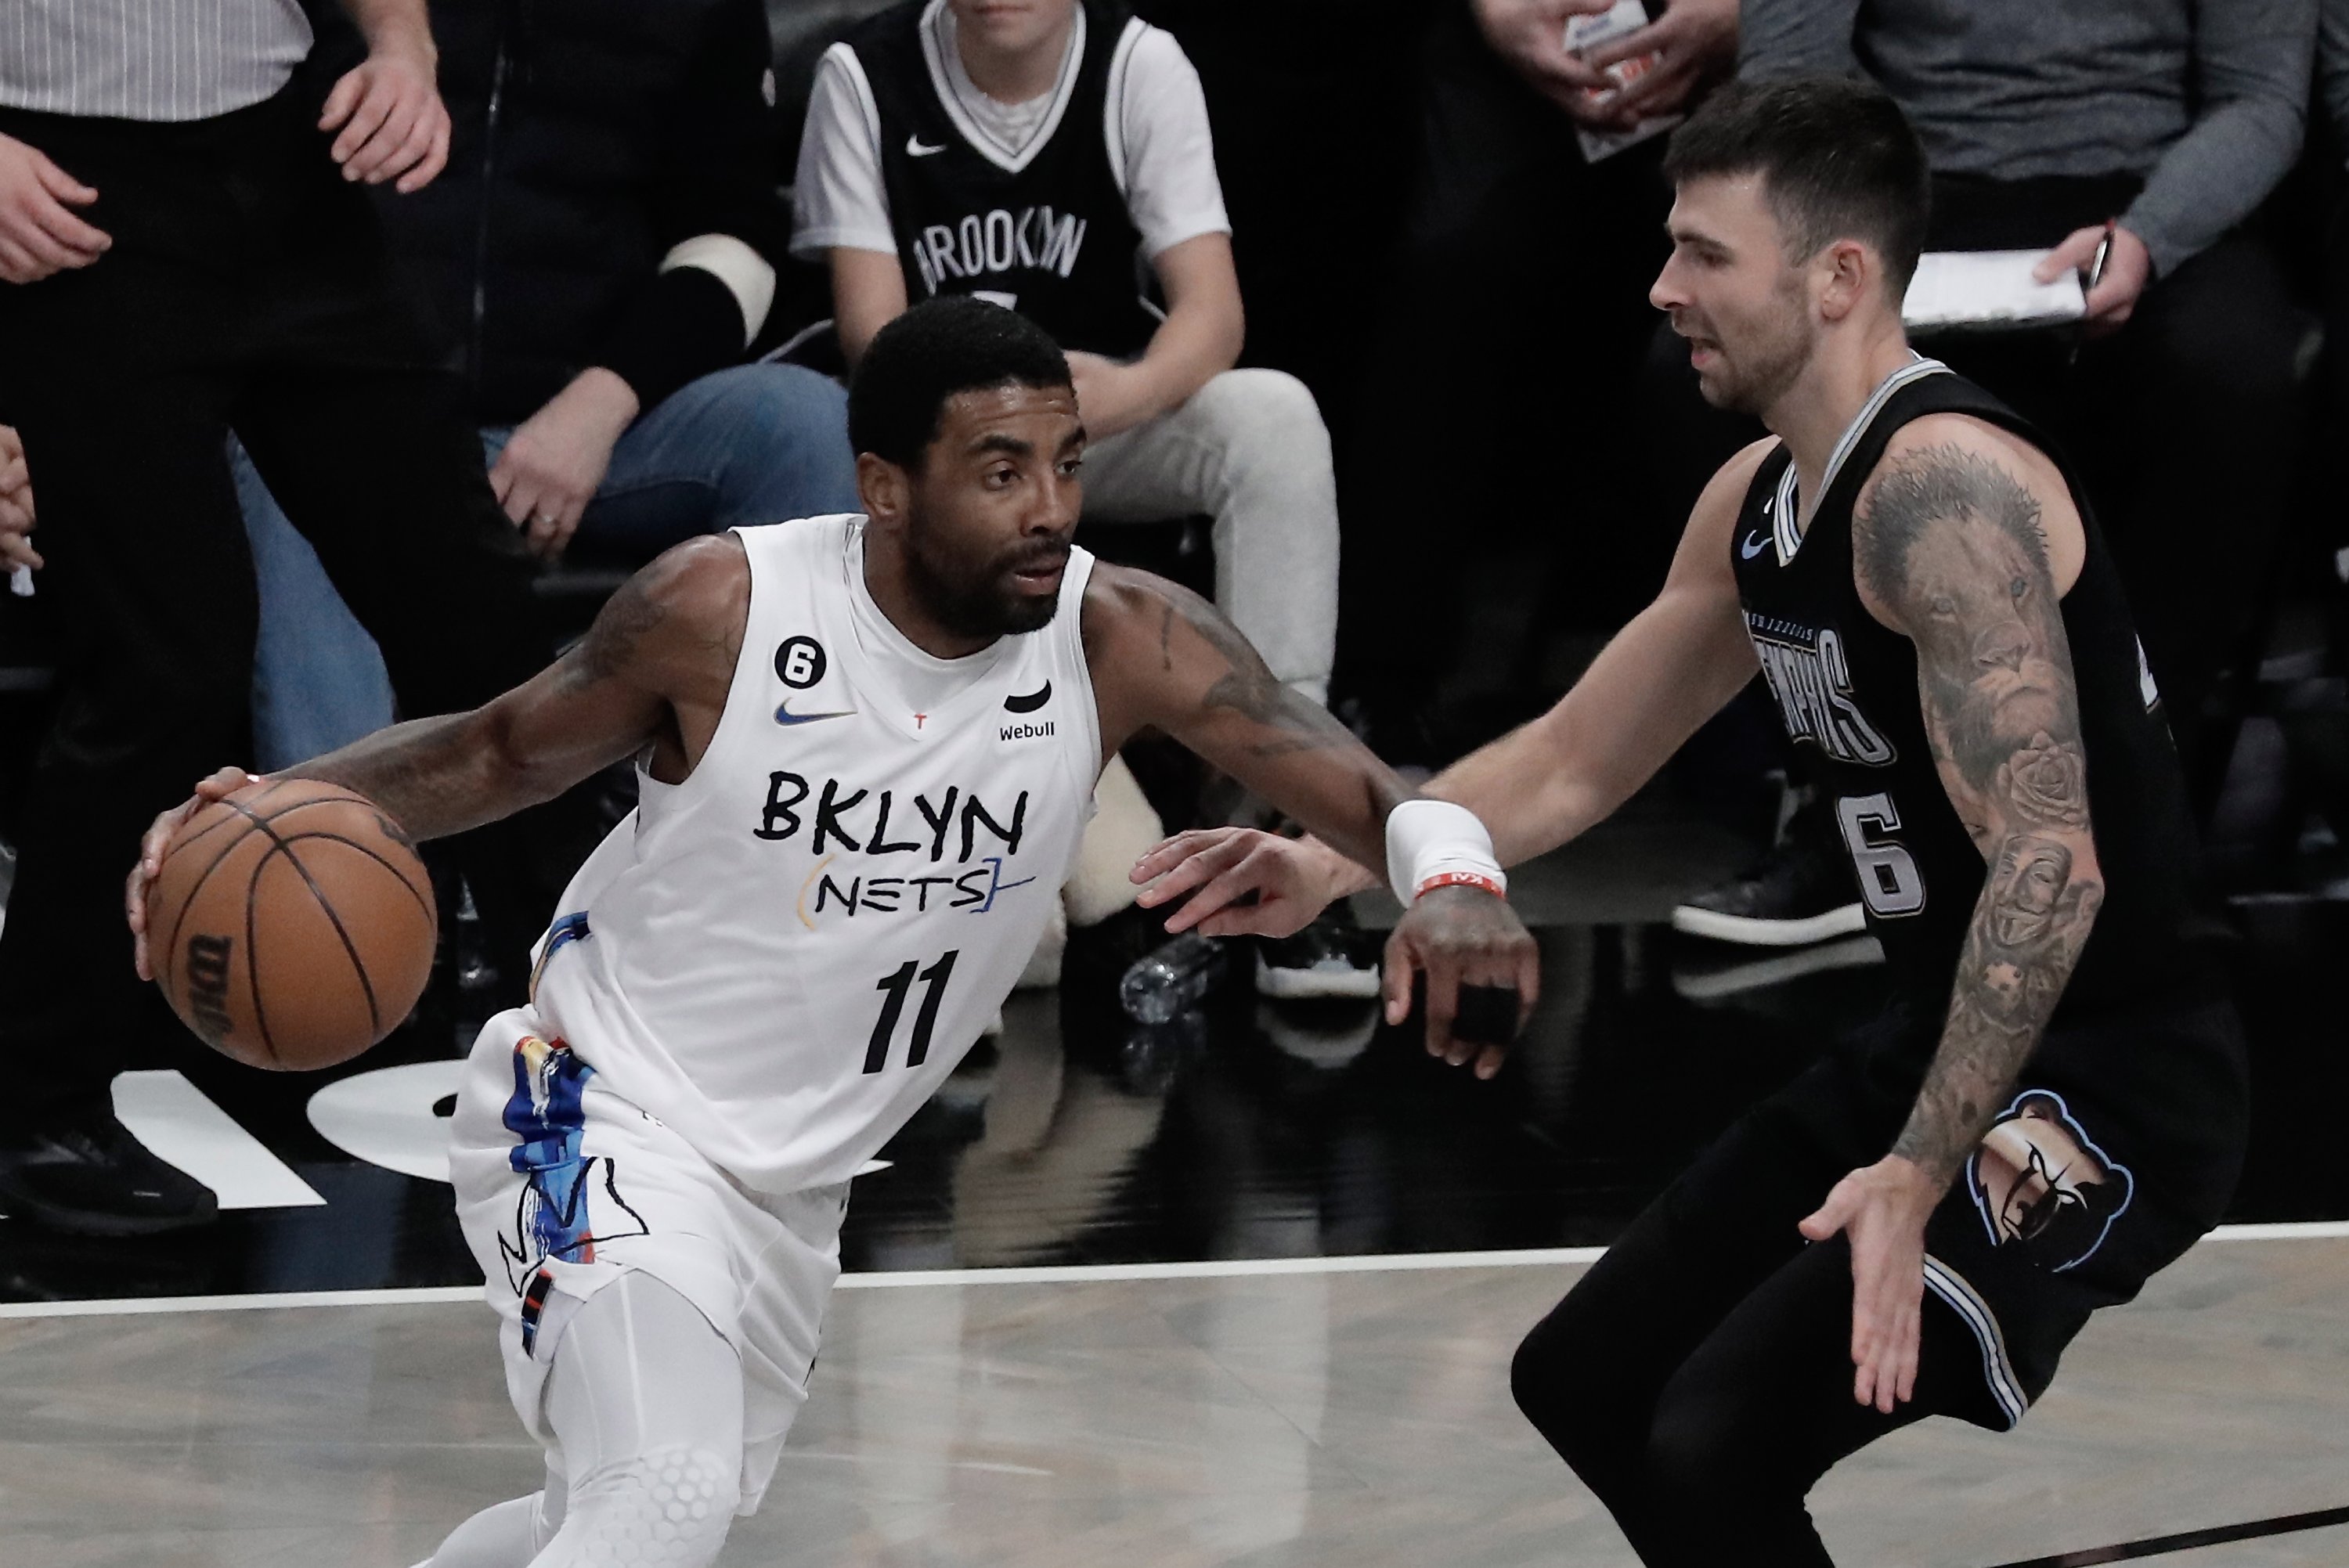 As Nets return home, focus returns to Kyrie Irving and NYC vaccine